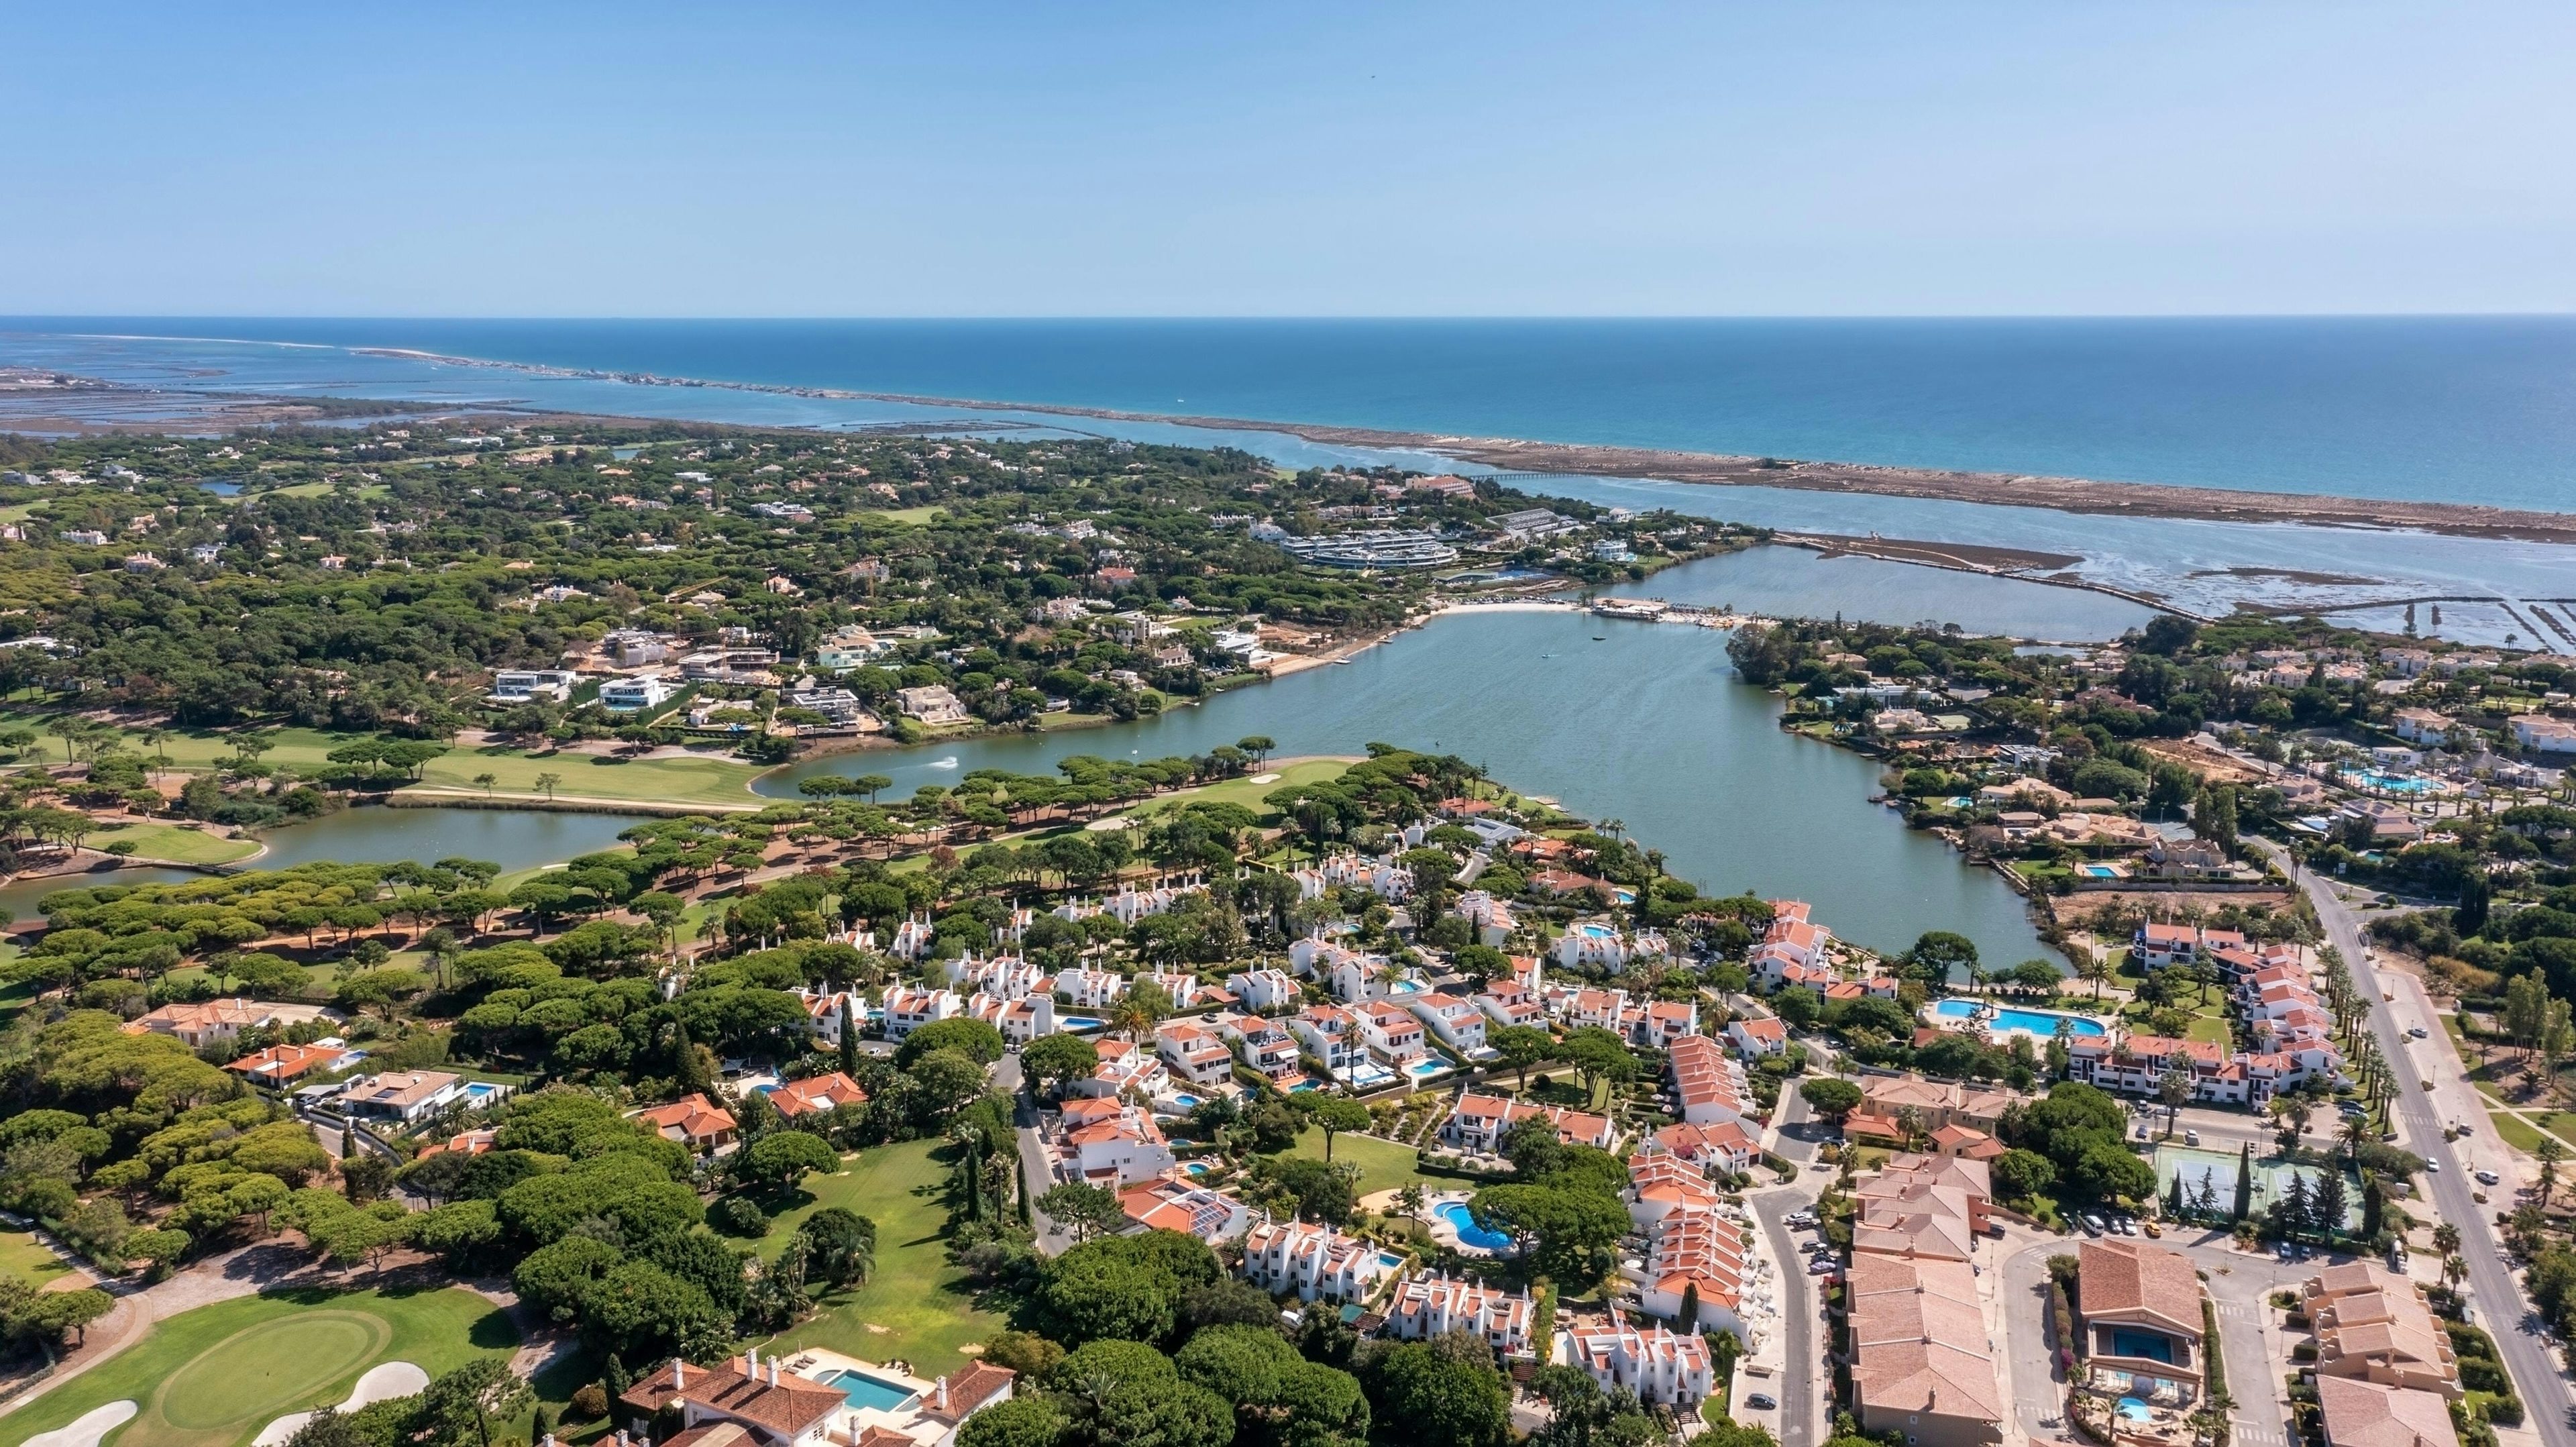 Panoramic view of Algarve's coastline showcasing bustling cities juxtaposed with the tranquil ocean.